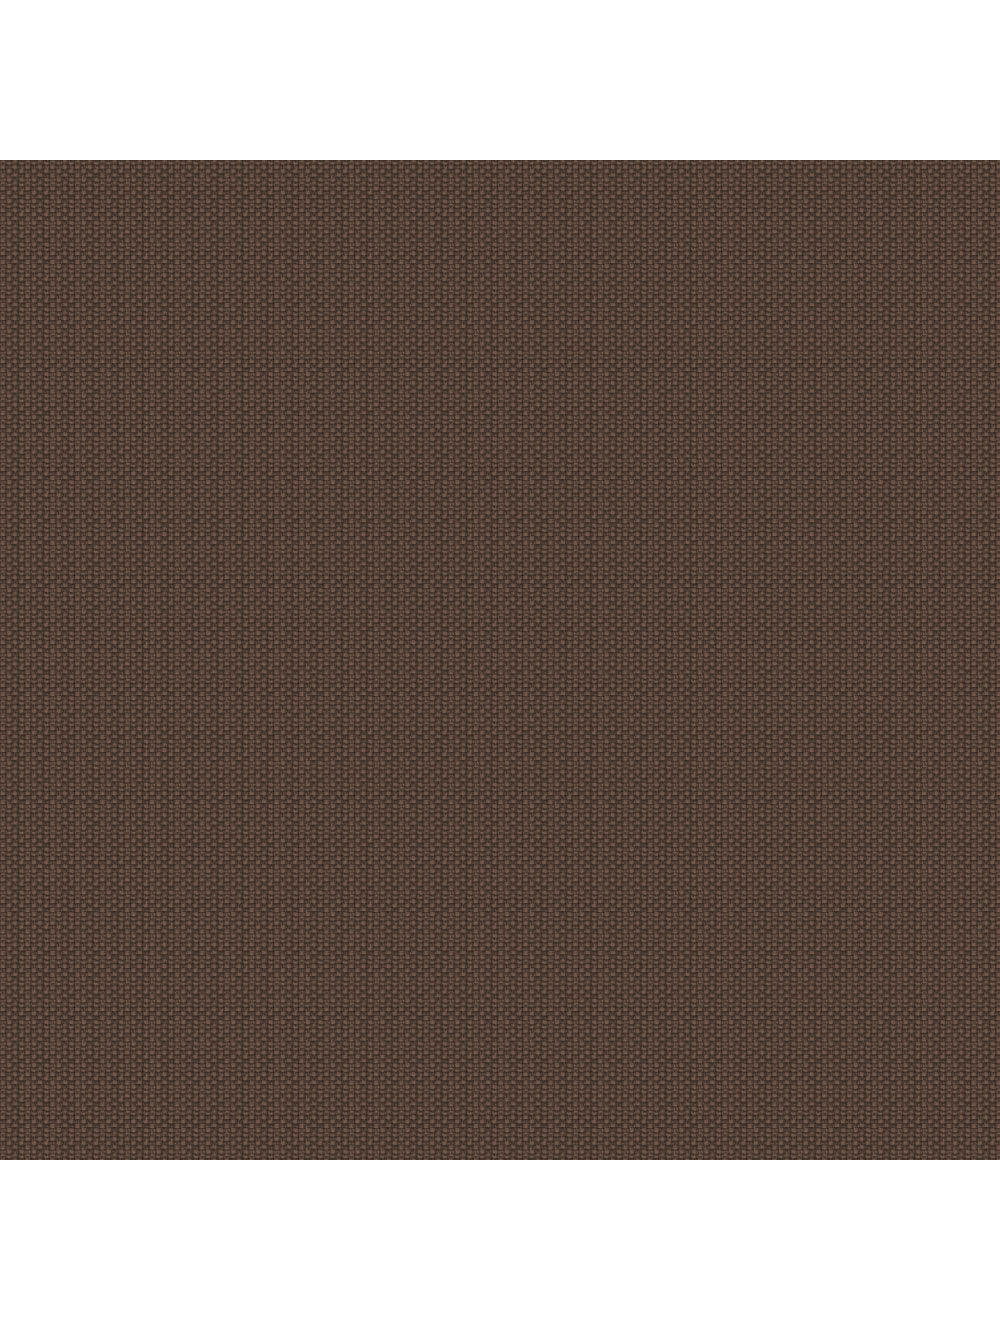 American Framed Brown Material Swatch